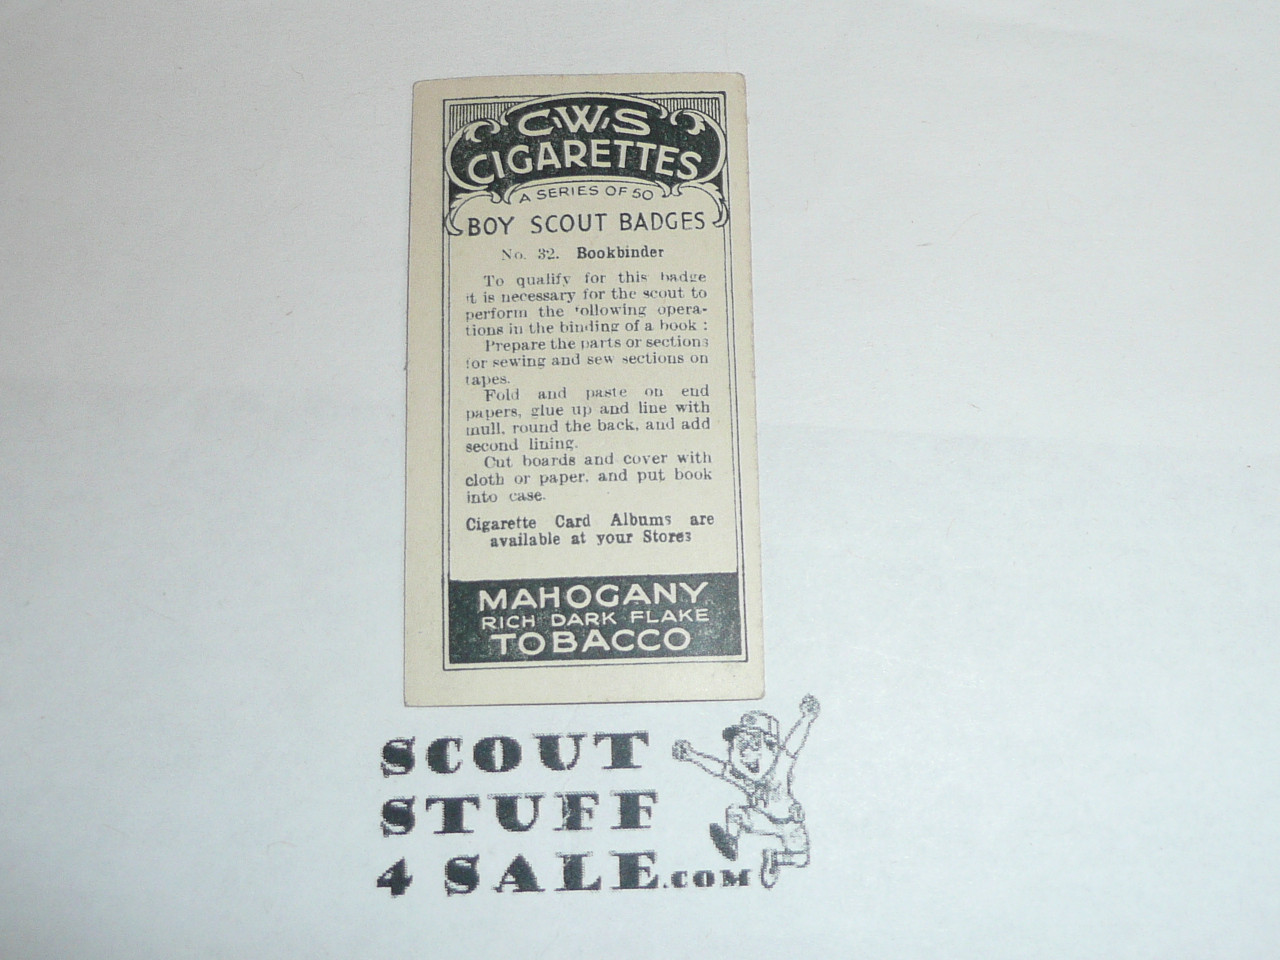 CWS Cigarette Company Premium Card, Boy Scout Badges Series of 50, Card #32 Bookbinder, 1939